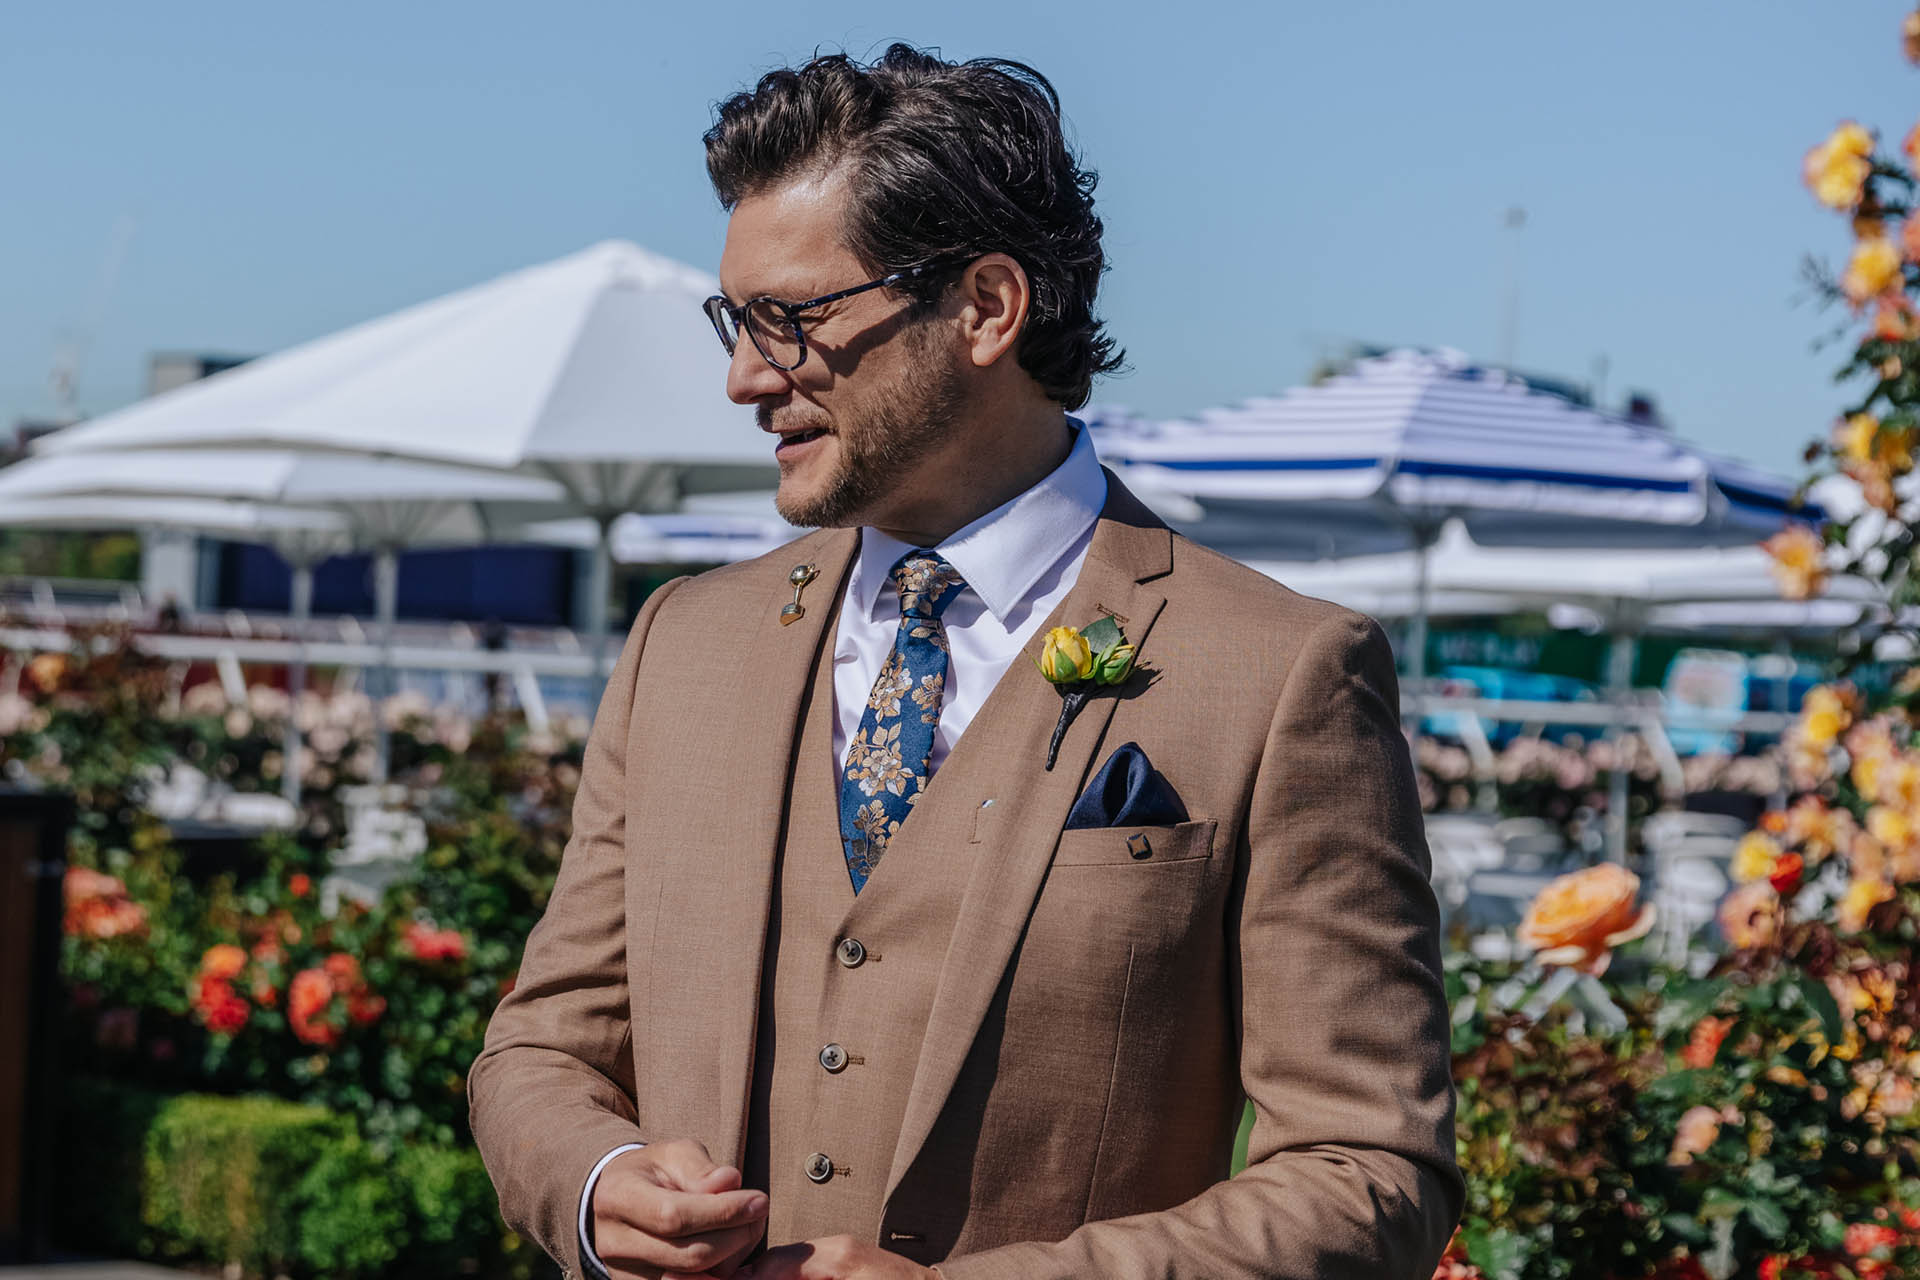 All the best menswear from the 2021 Melbourne Cup Carnival image